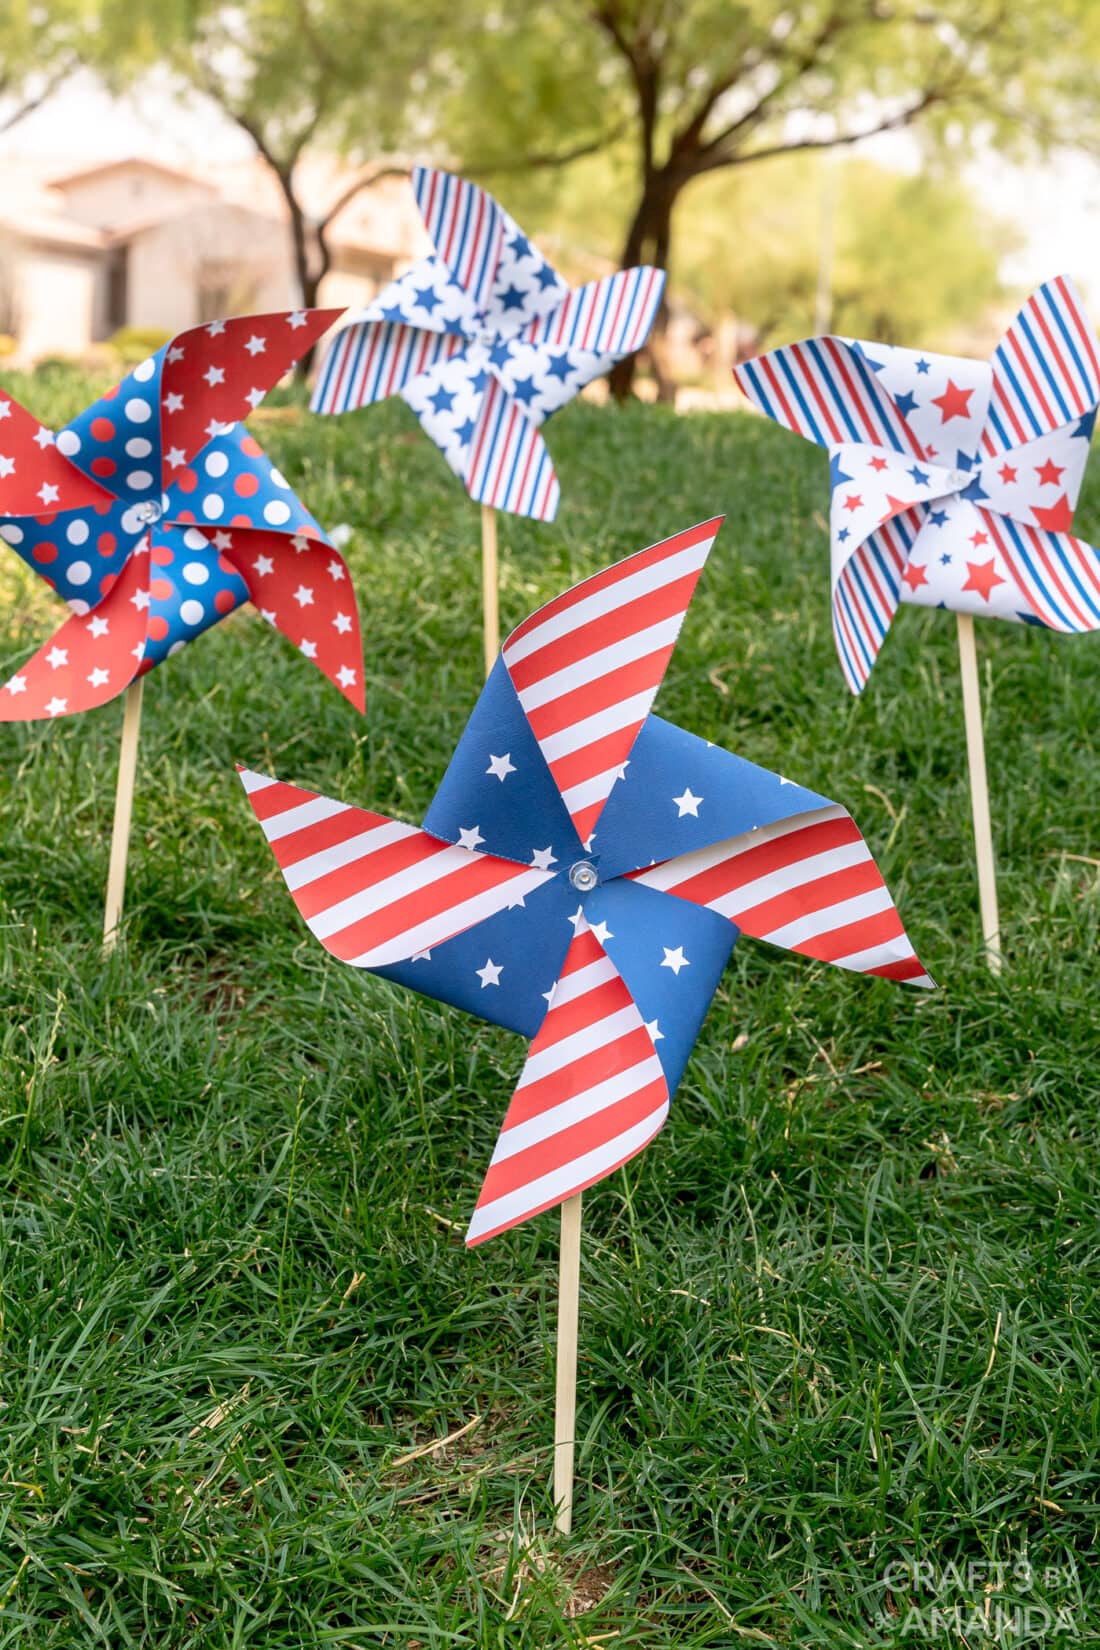 4th of July craft ideas and home decor